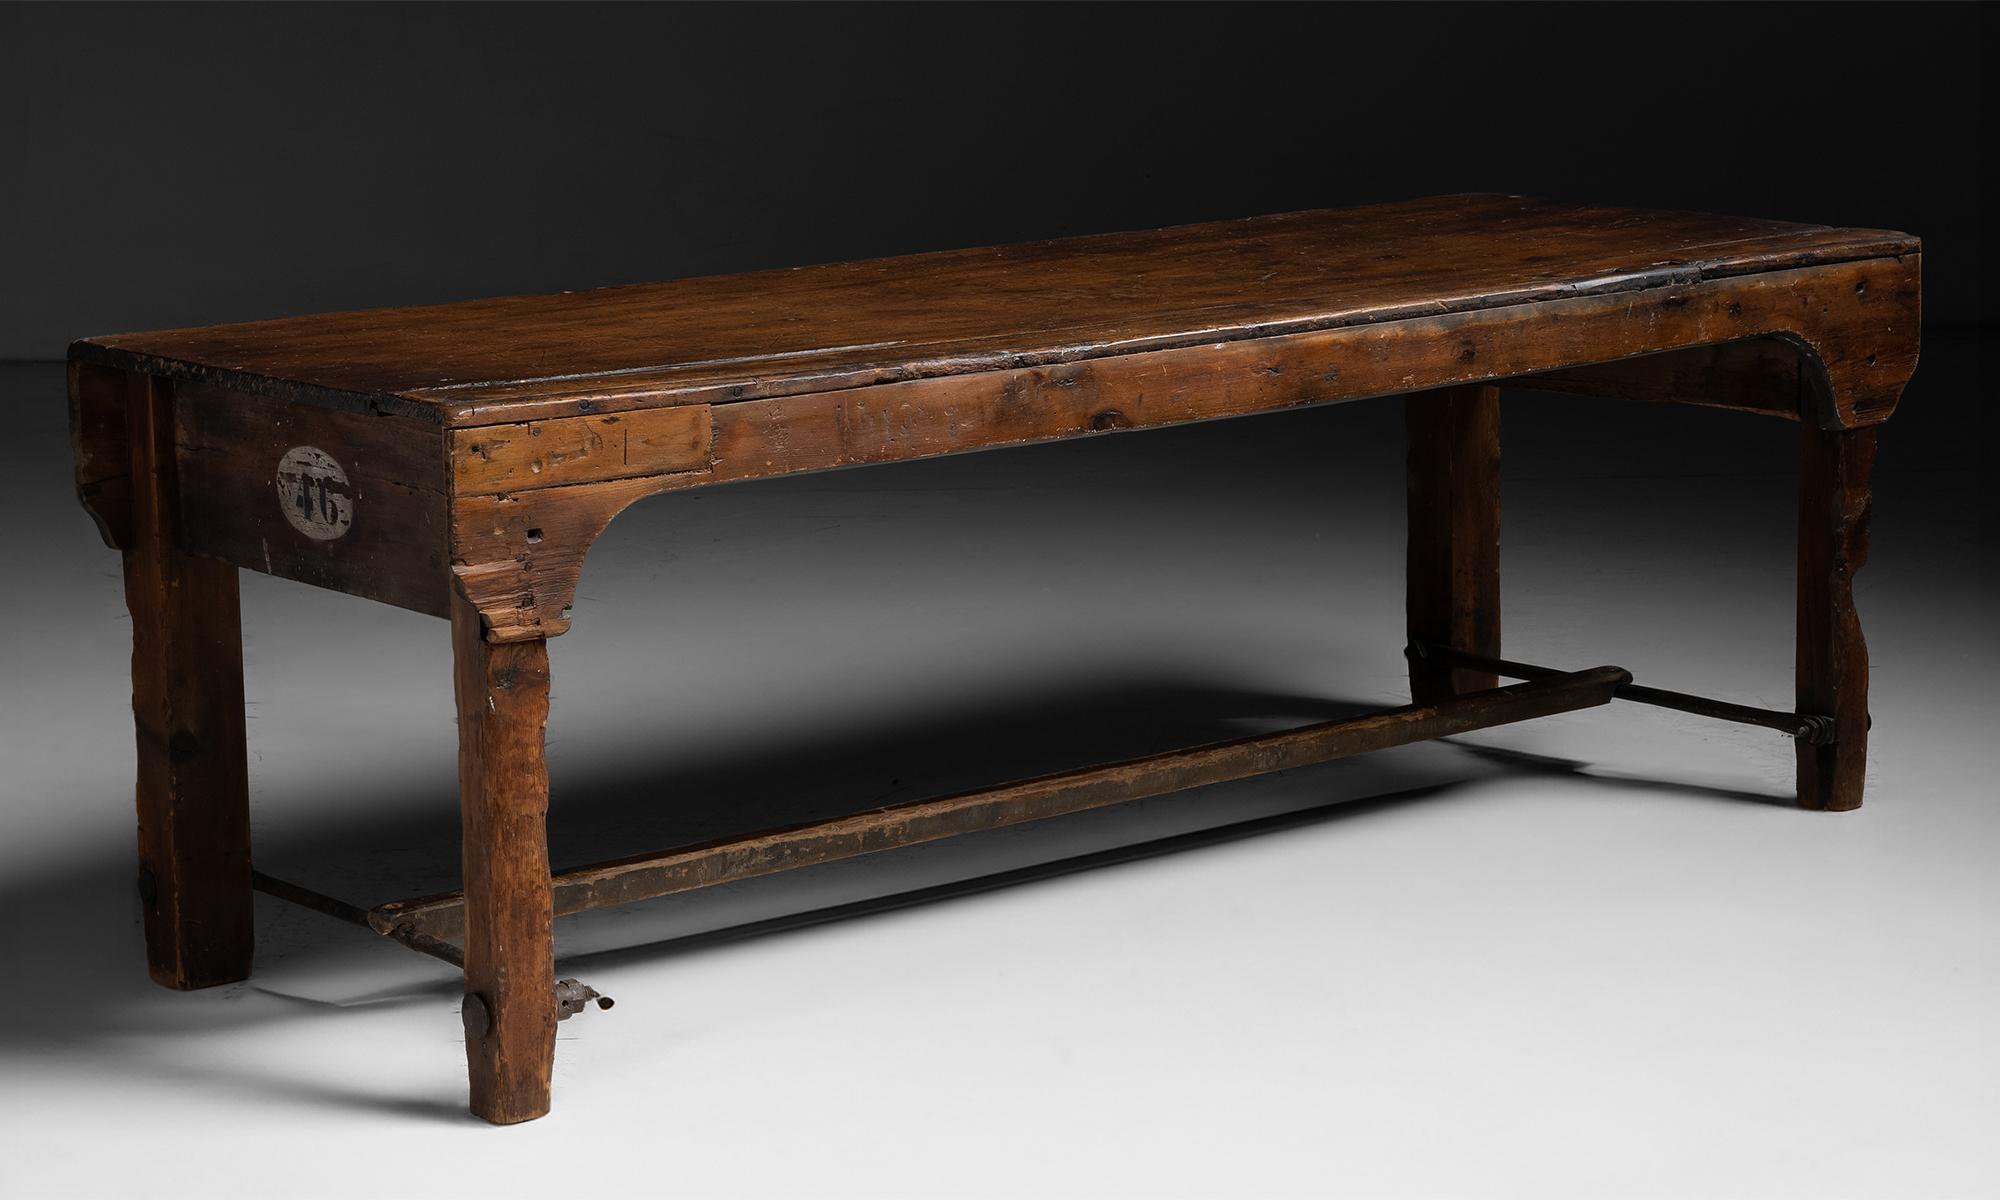 Industrial Table

England circa 1890

Constructed in Mahogany & Pitch Pine, with original painted numbers.

87.25”L x 32.25”d x 29.75”h